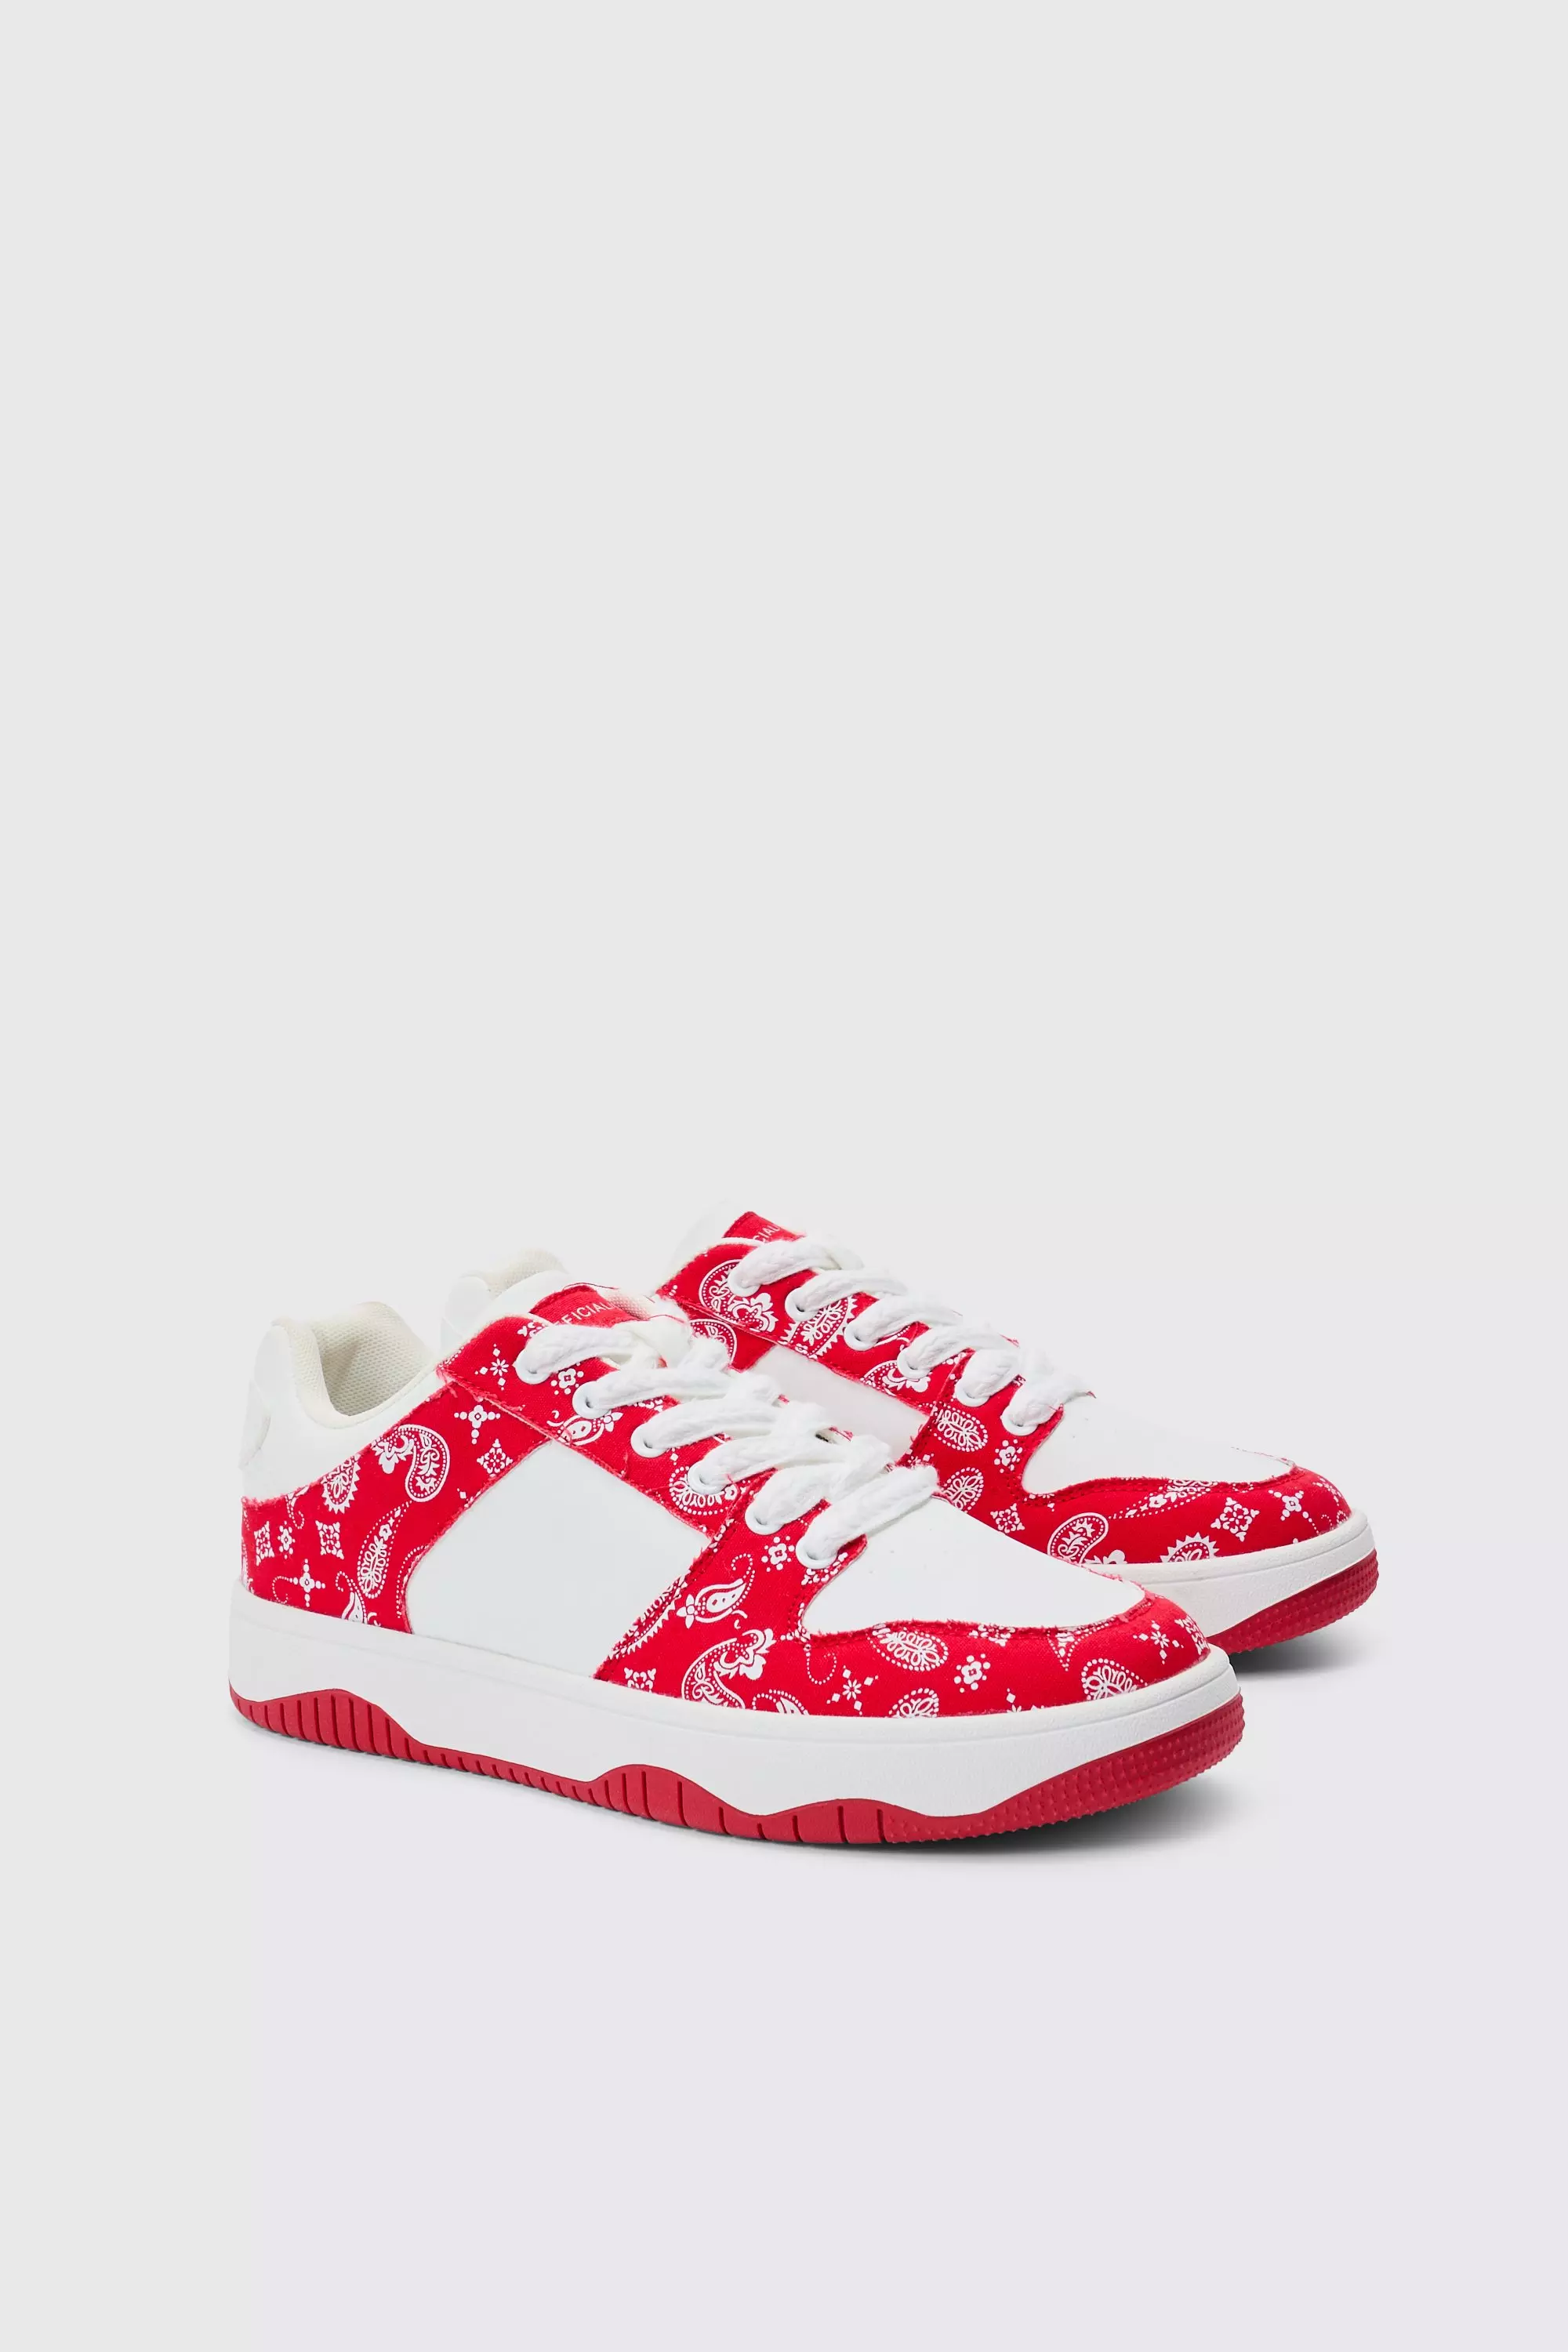 Limited Edition Bandana Print Chunky Trainer In Red Red